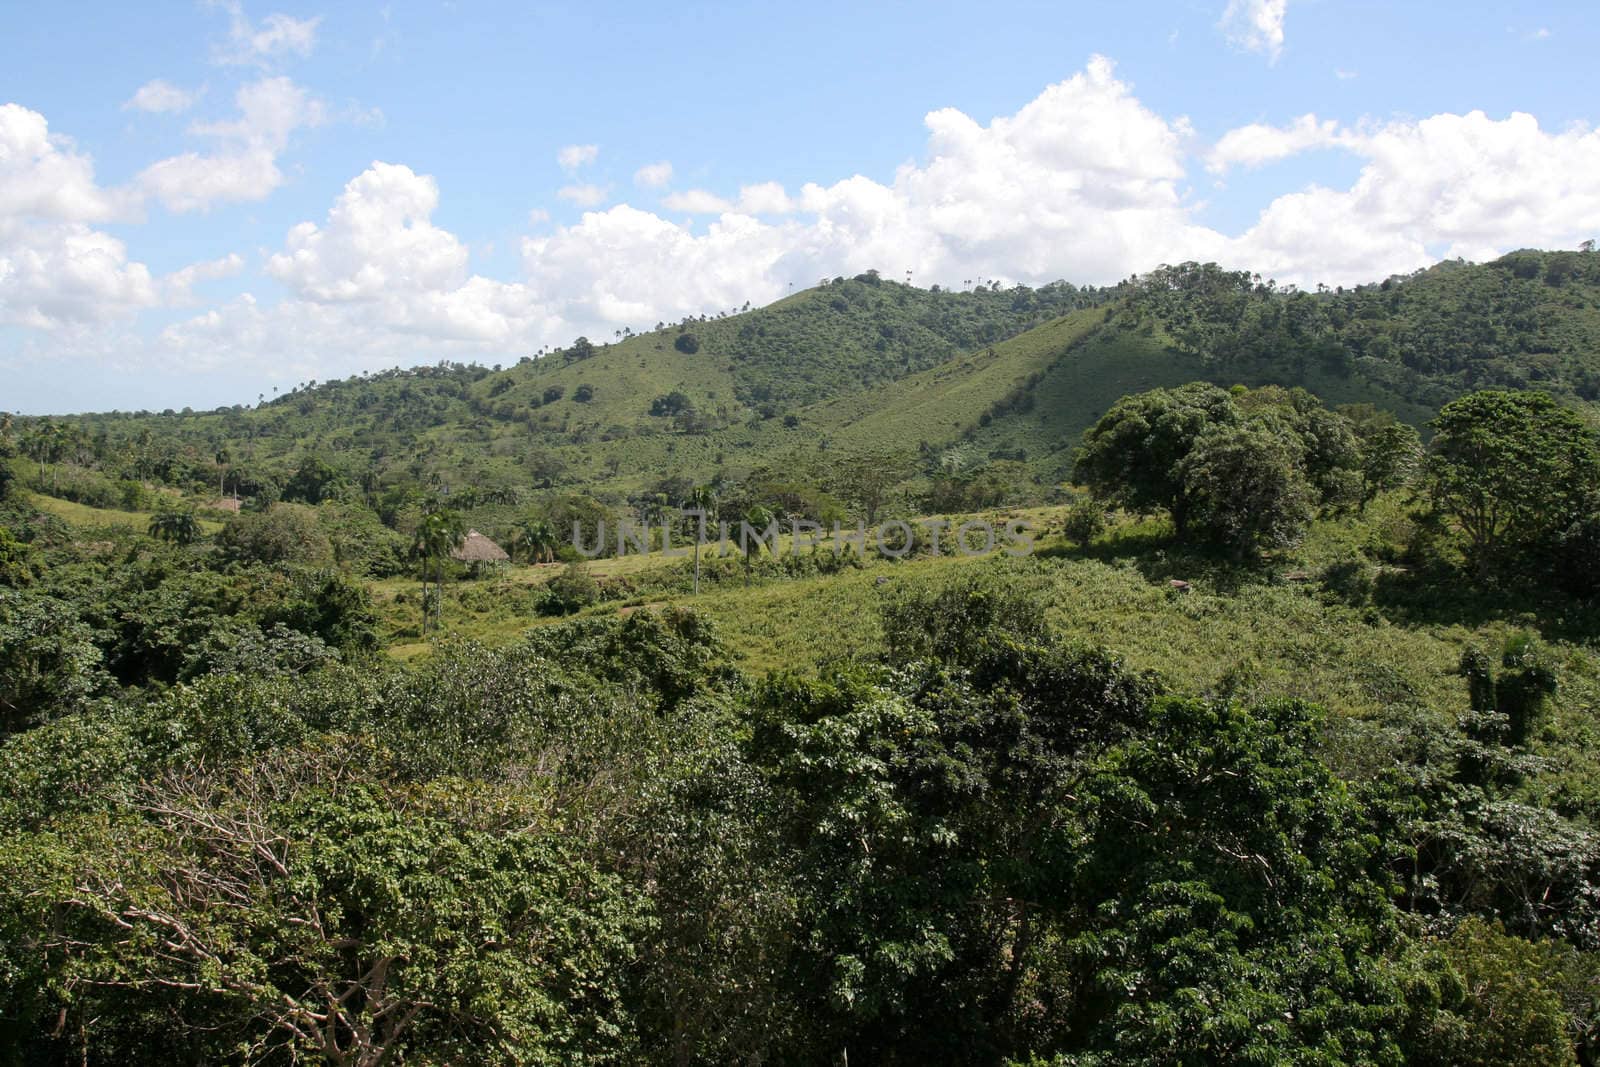 The lush rolling hills landscape of the countryside near Punta Cana, Dominican Republic.